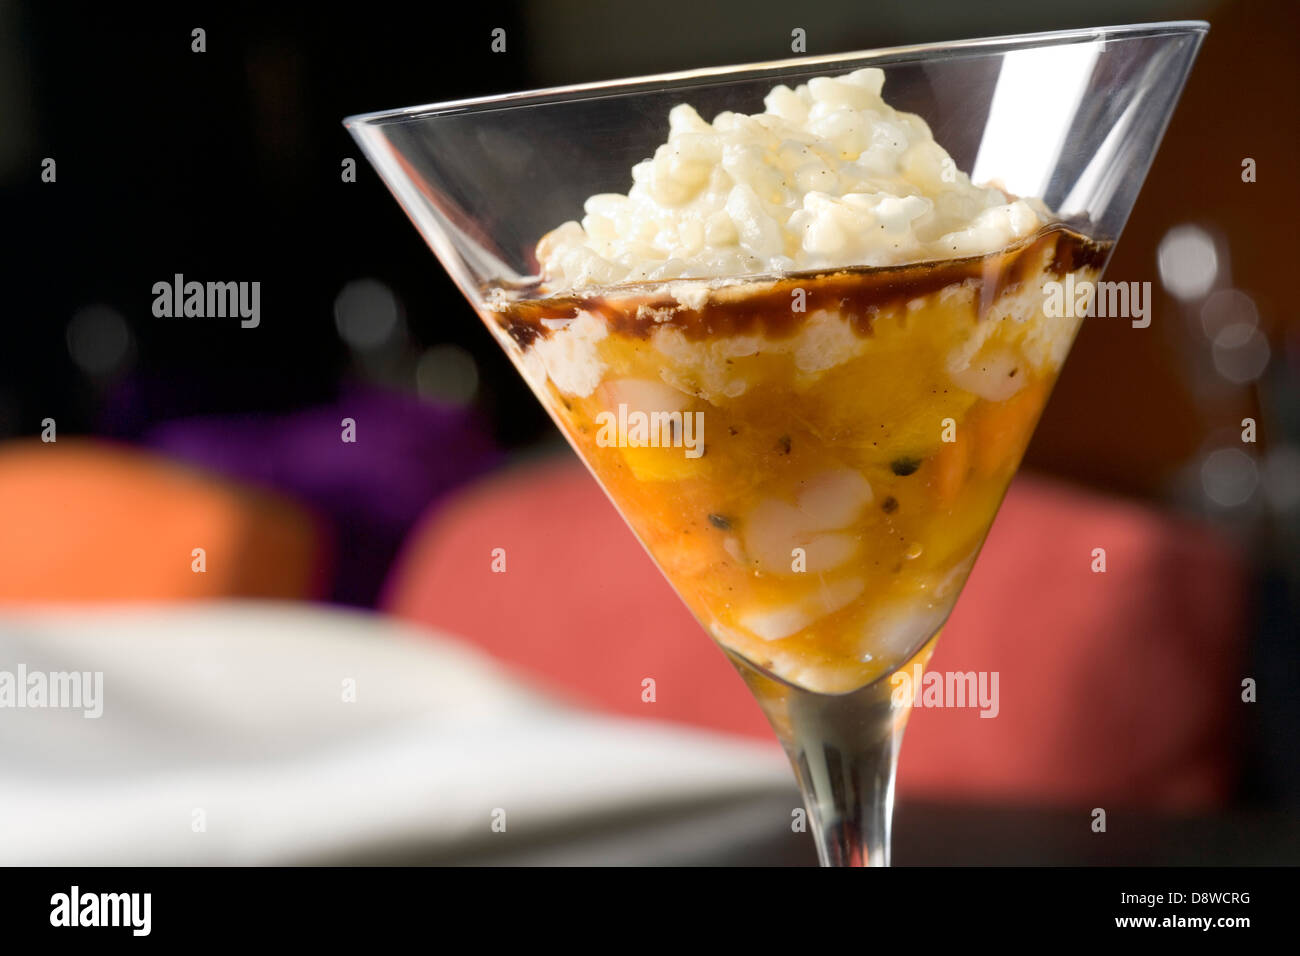 Rice pudding with stewed exotic fruit Stock Photo